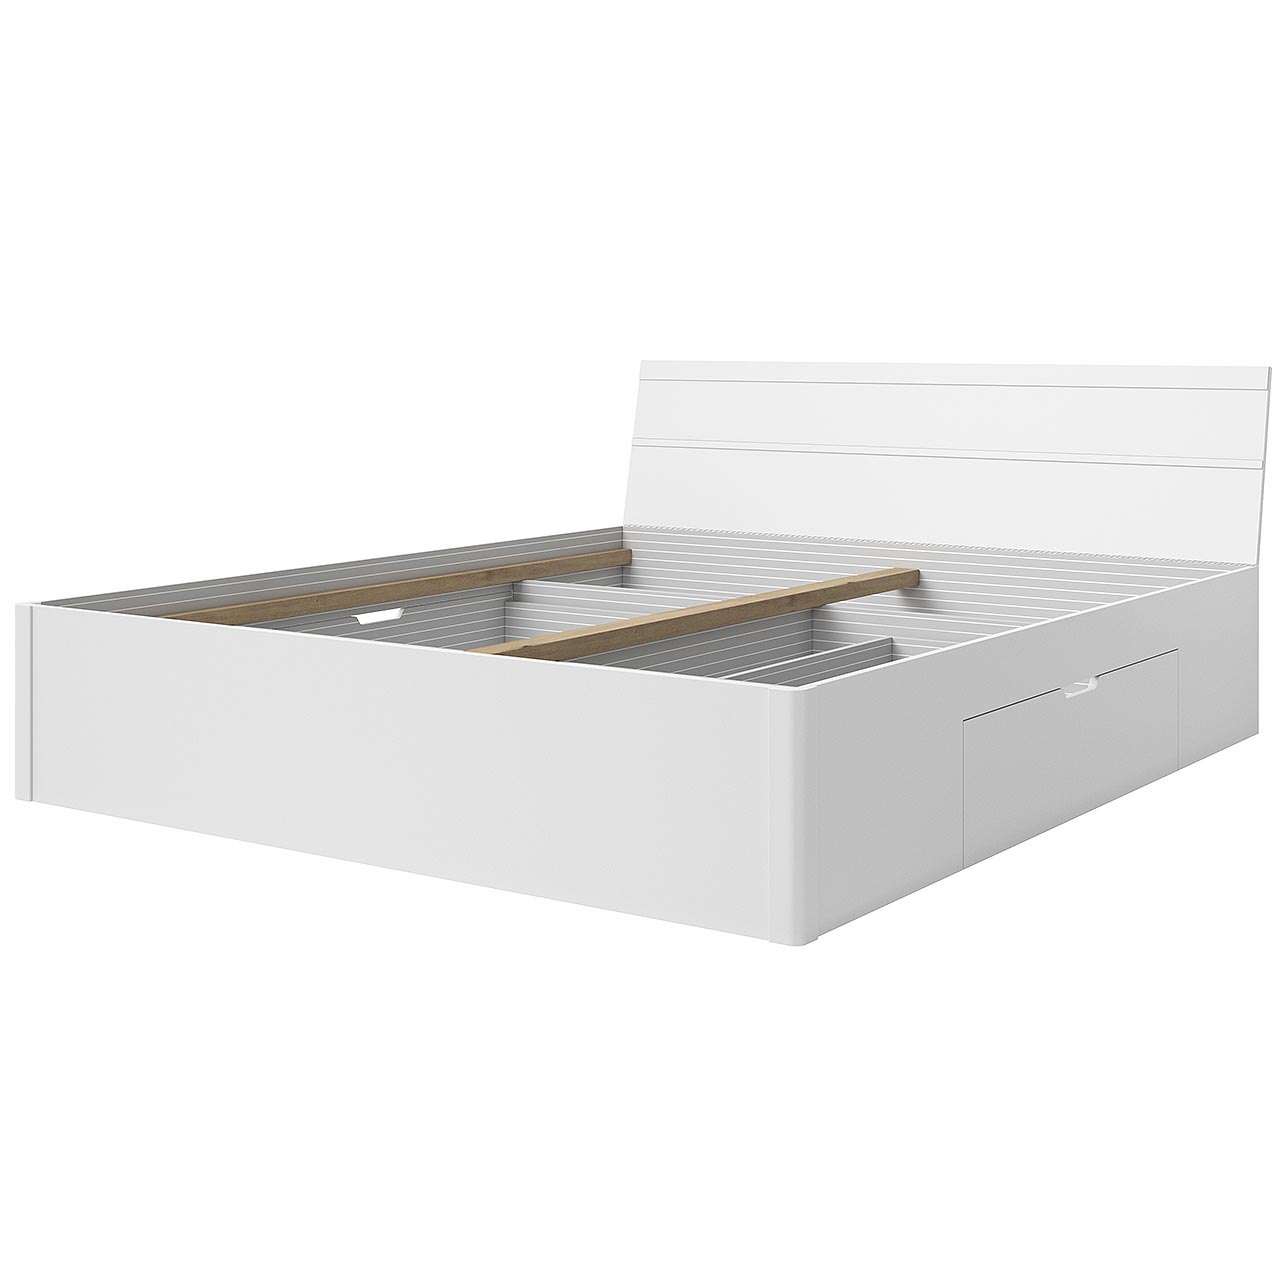 Bed with drawers 160x200 BETA BE51 white